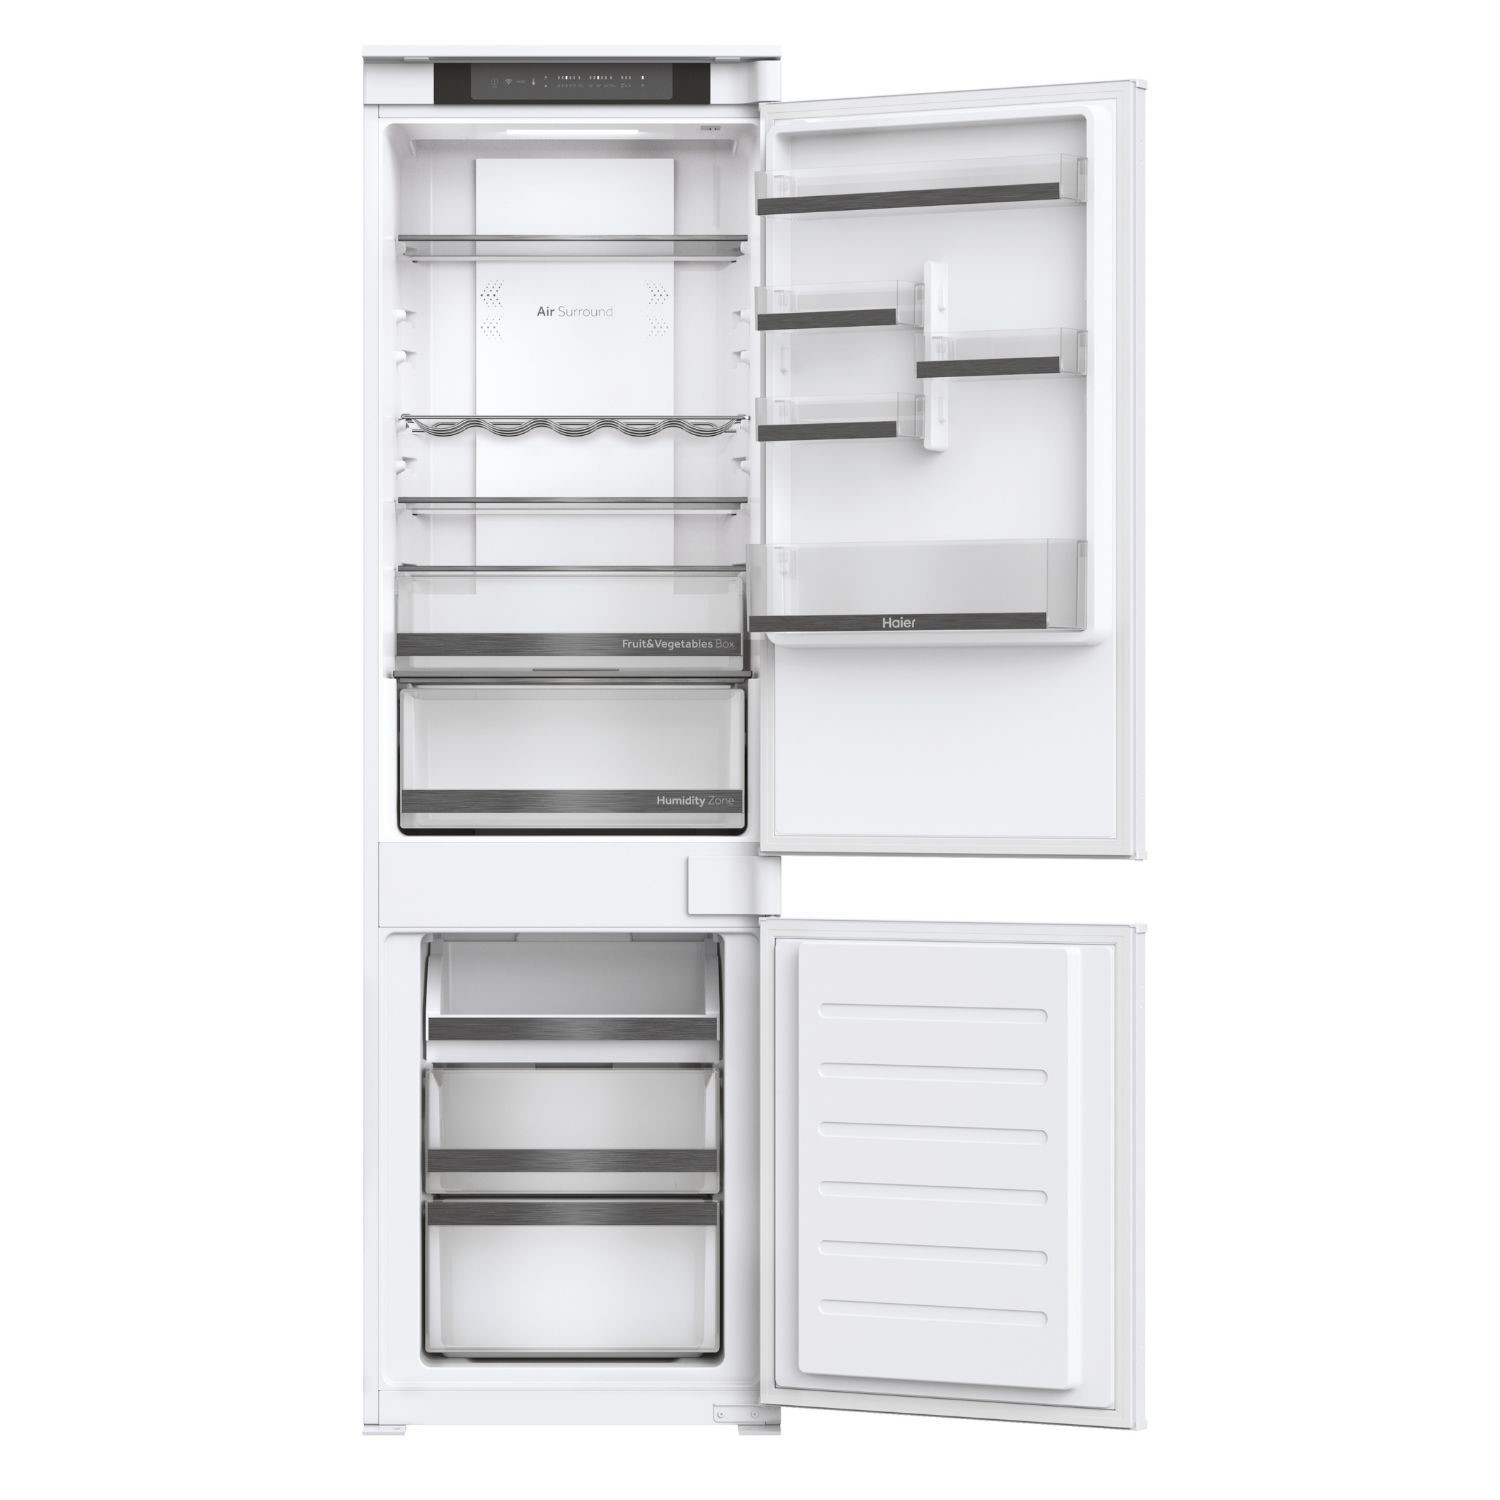 Photos - Other for Computer Haier Series 6 248 Litre 70/30 Integrated Fridge Freezer 34901654 